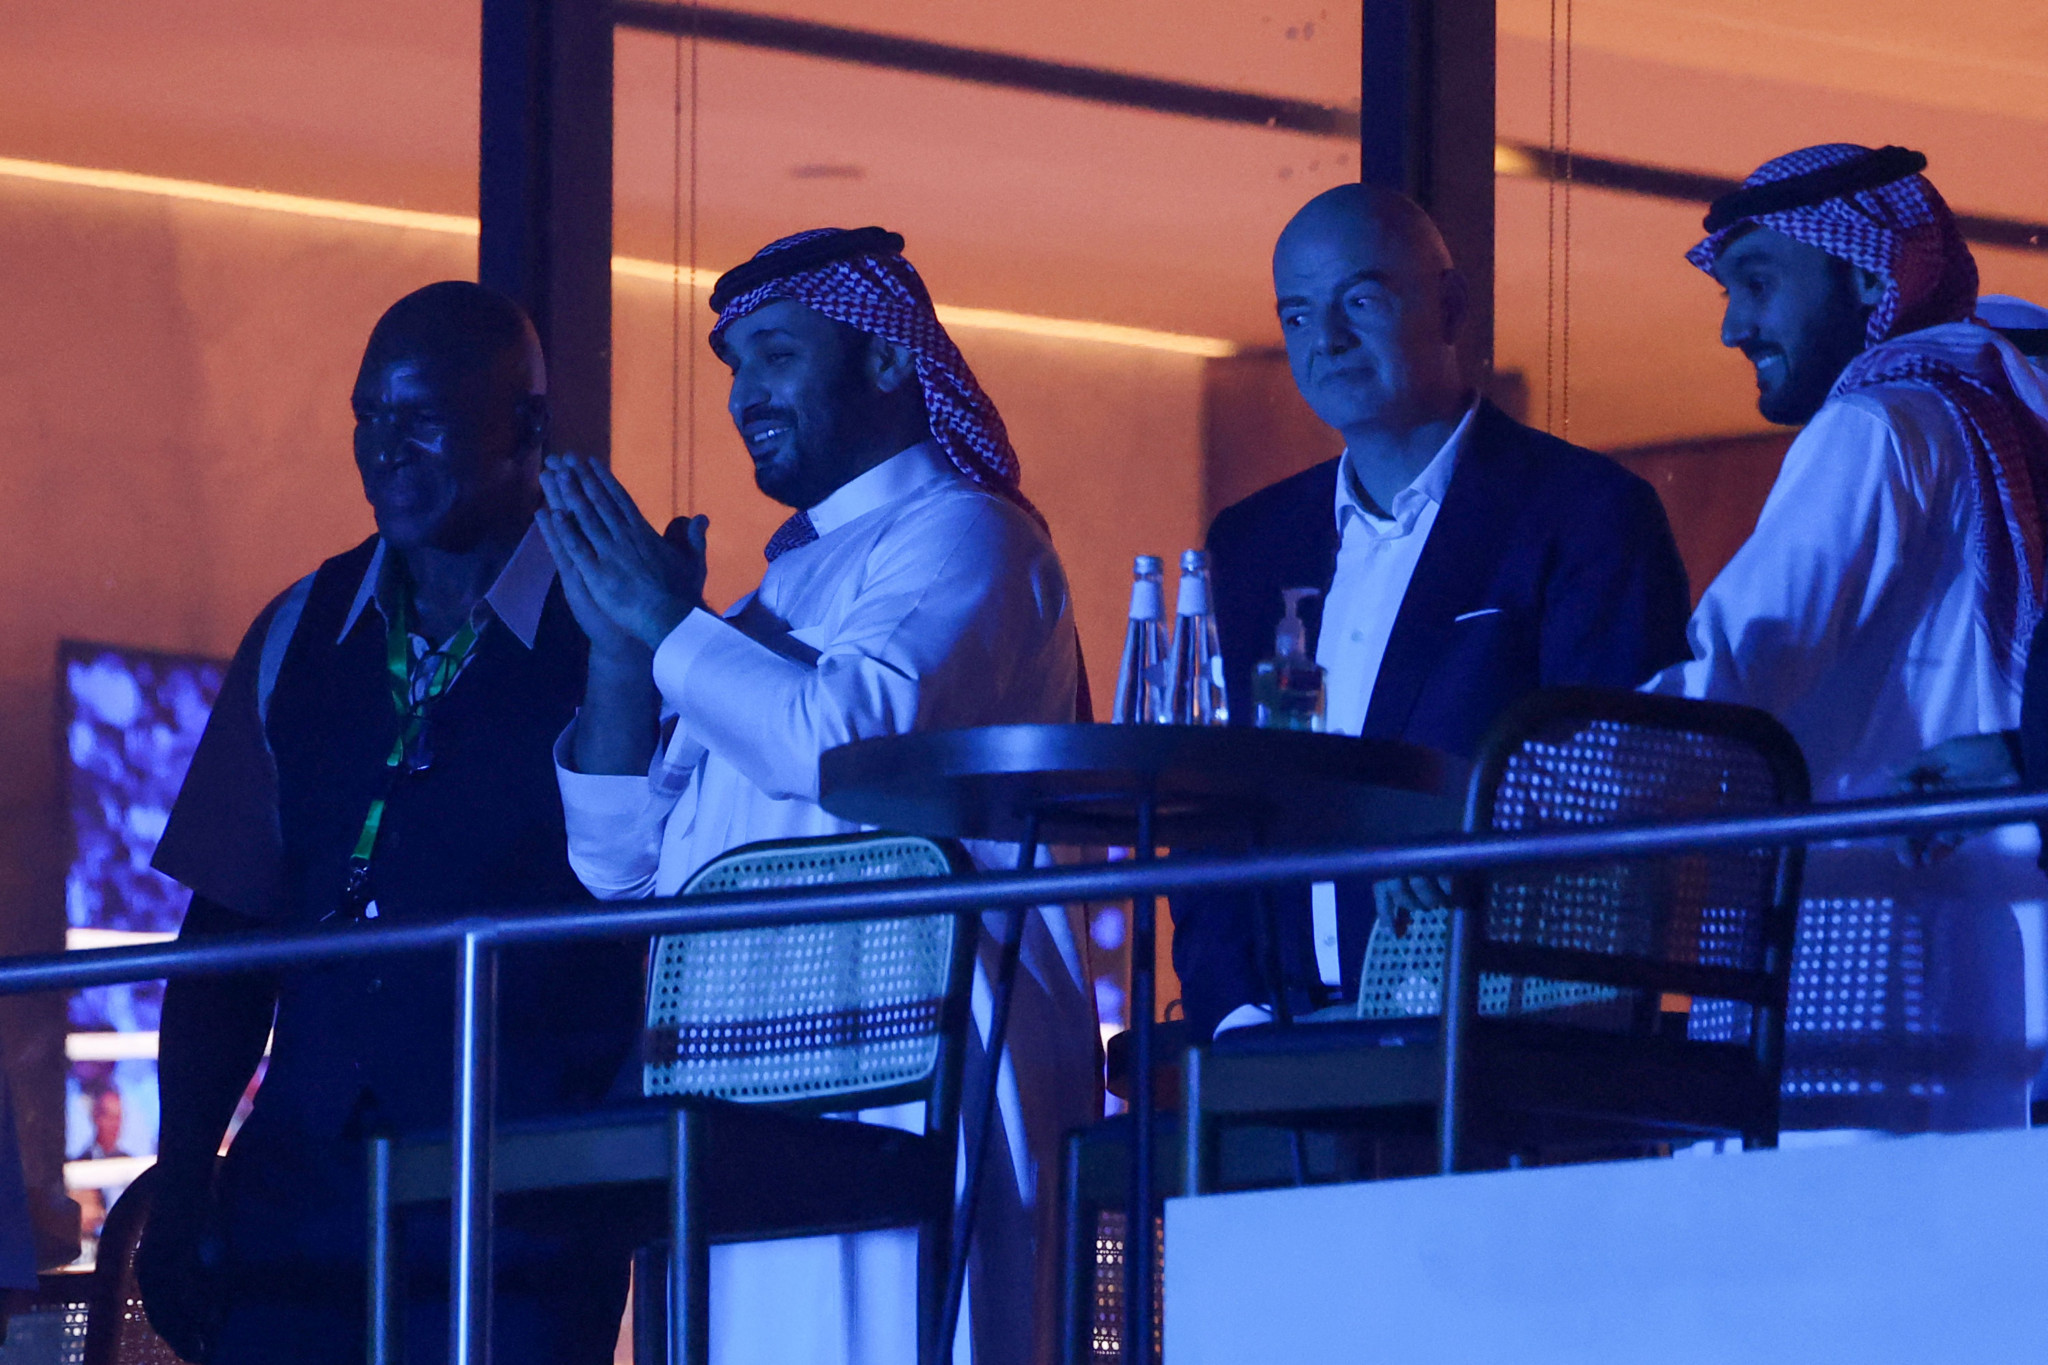 FIFA President Gianni Infantino was in Saudi Arabia for the world title boxing fight between Oleksandr Usyk and Anthony Joshua last weekend ©Getty Images